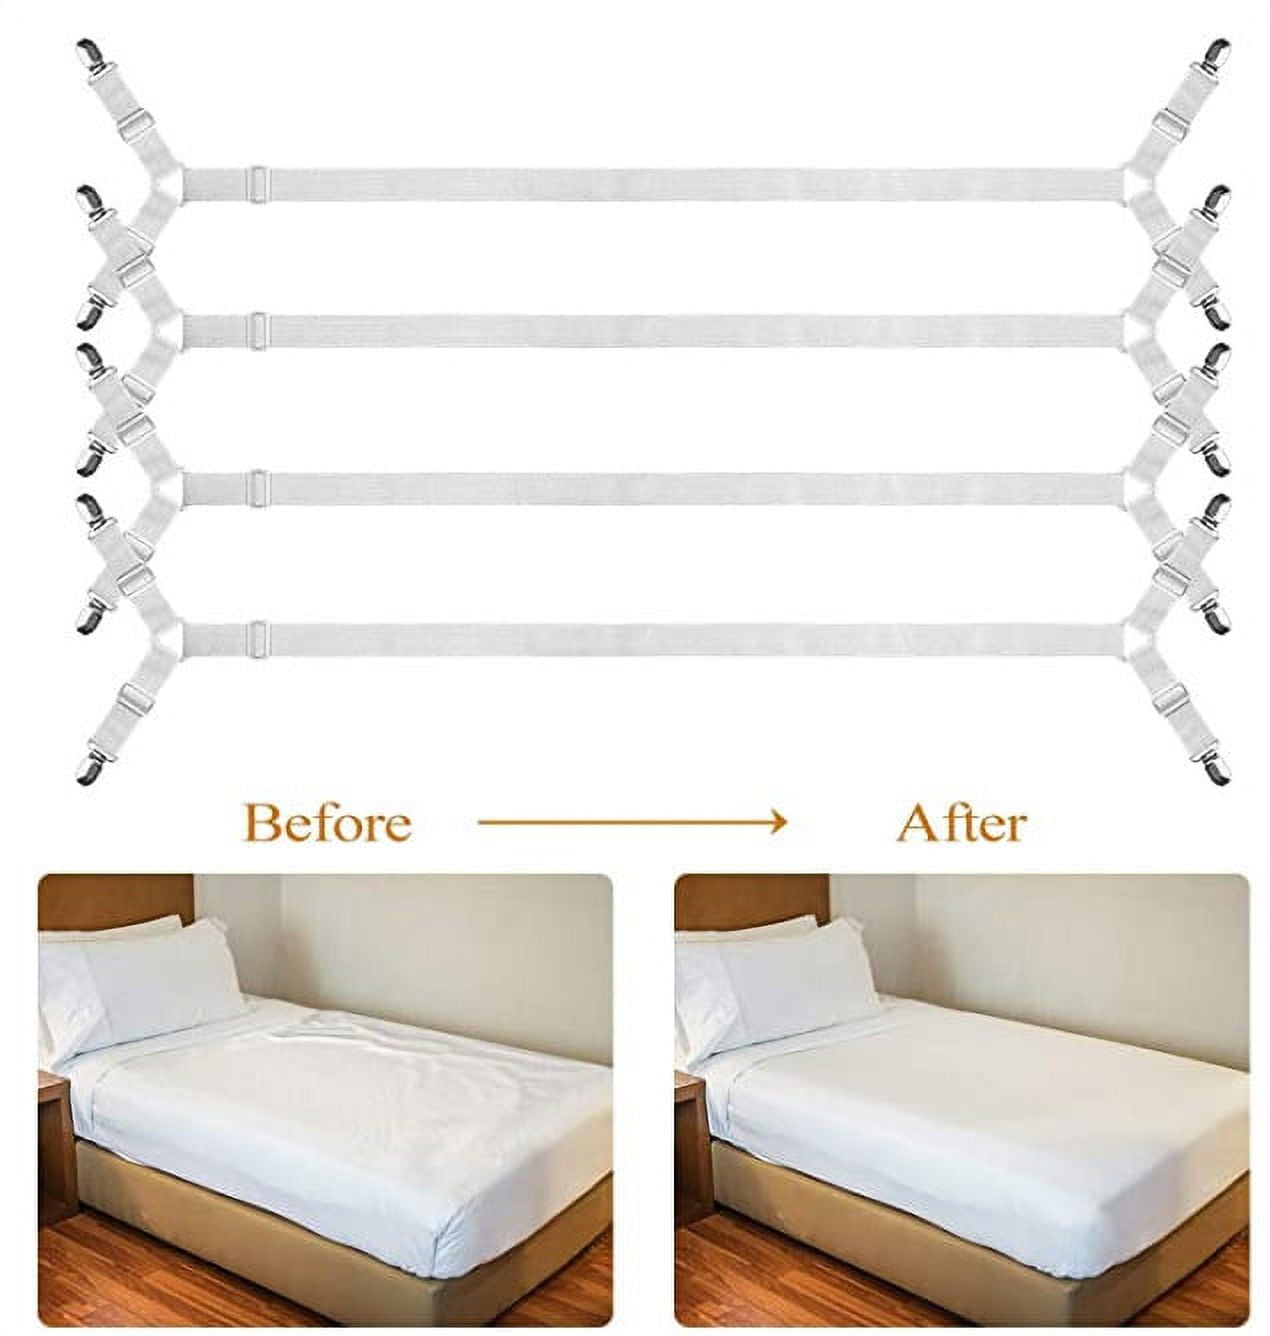 Cozary Bed Sheet Holder, Fitted Flat Bed Sheet Keeper, Wide